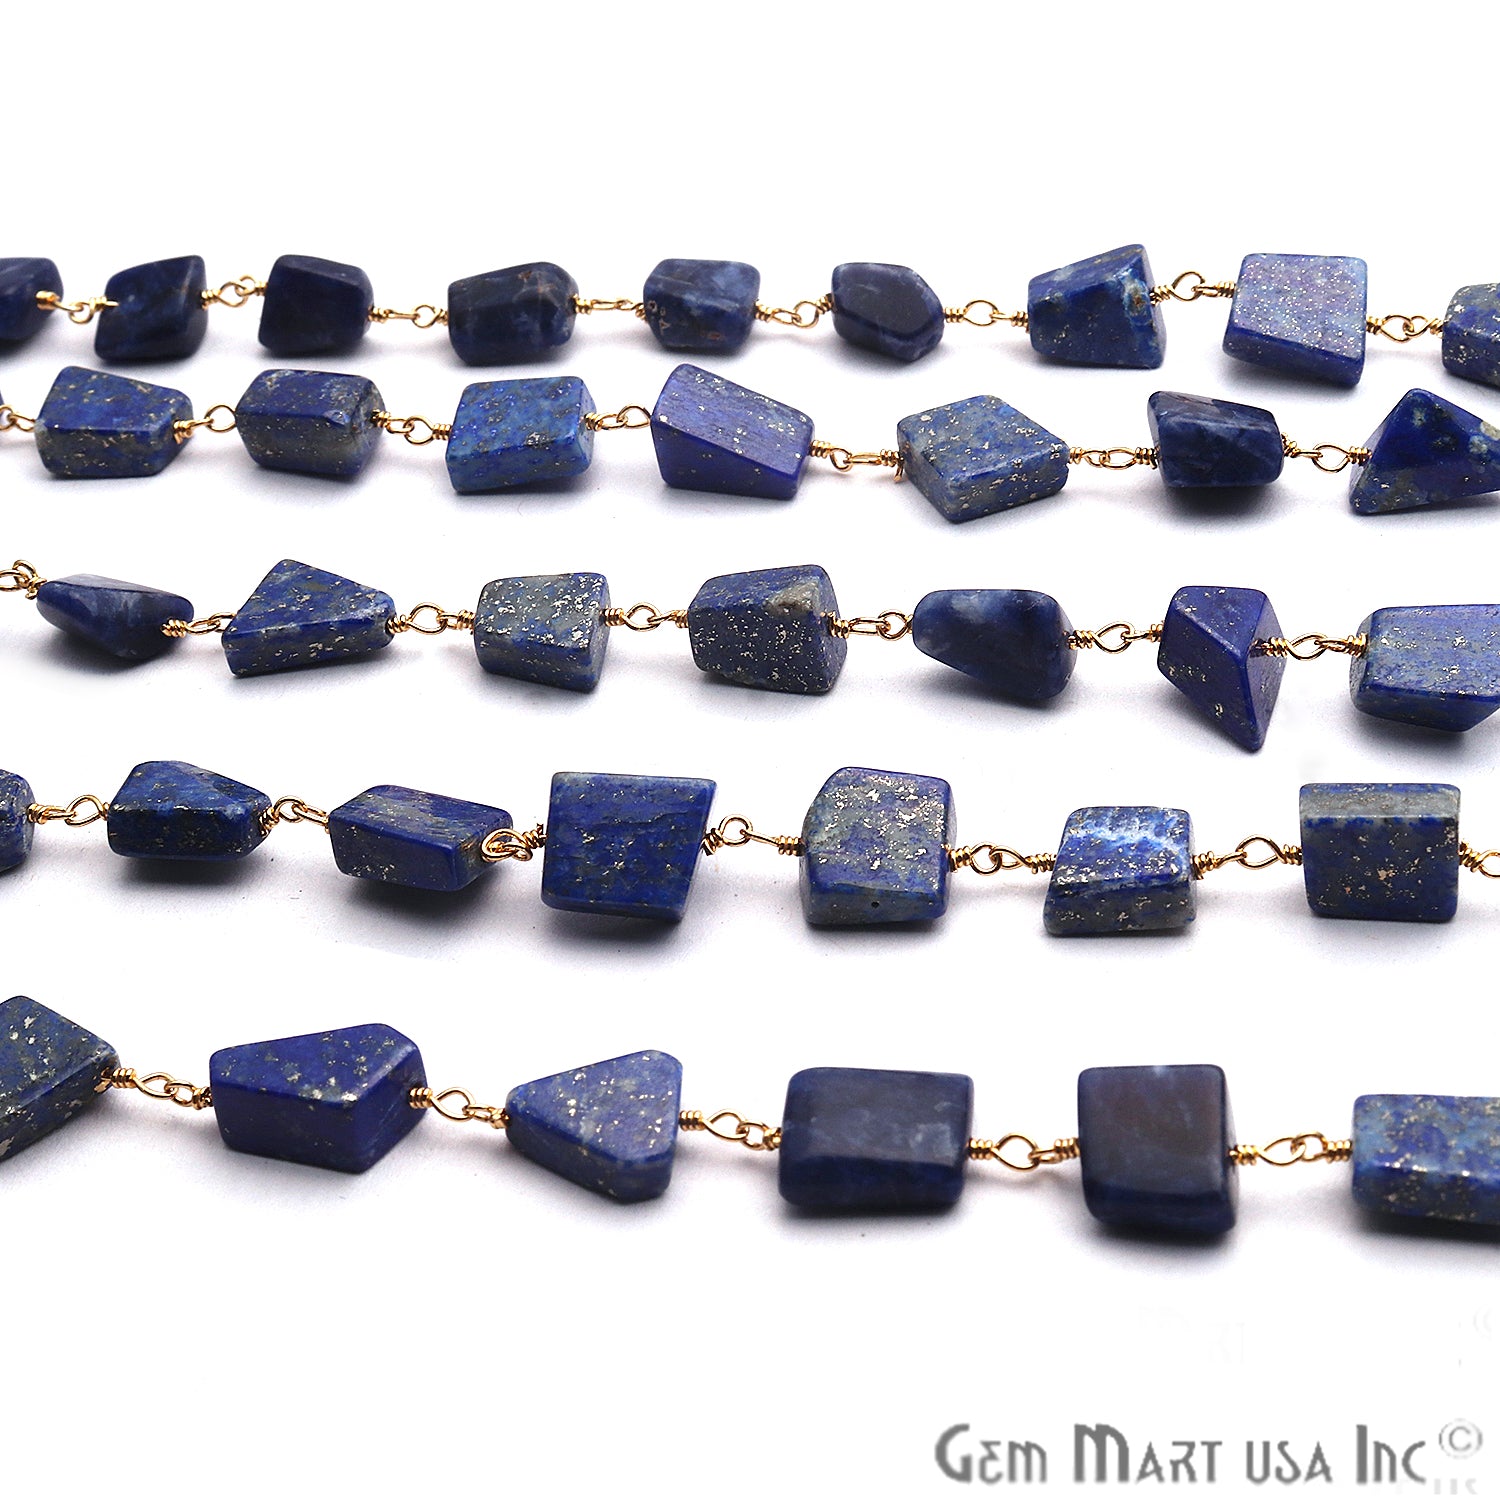 Lapis Smooth 12x8mm Tumble Gold Wire Wrap Rough Bead Faceted Rosary Chain - GemMartUSA